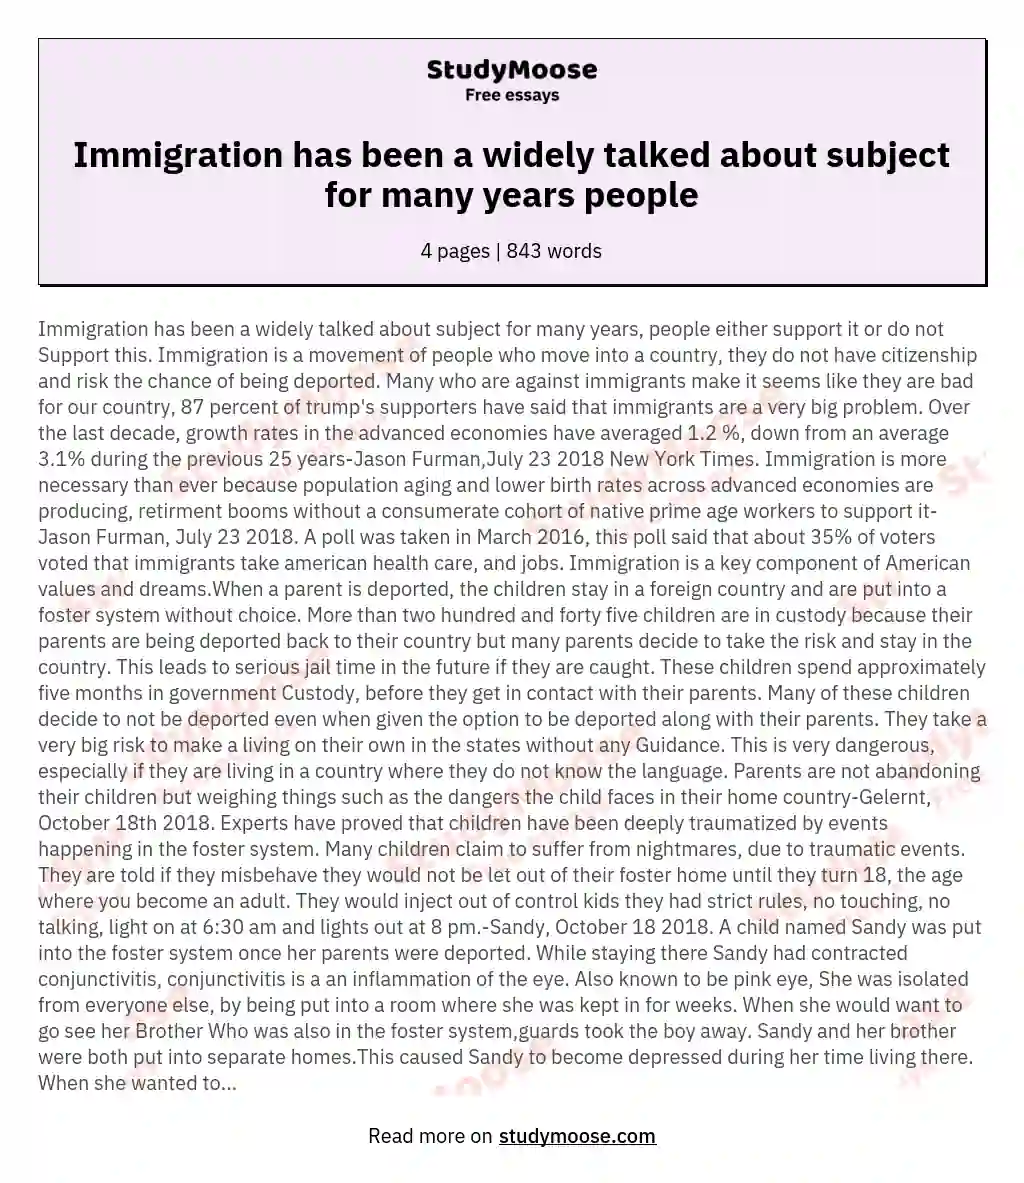 Immigration has been a widely talked about subject for many years people essay